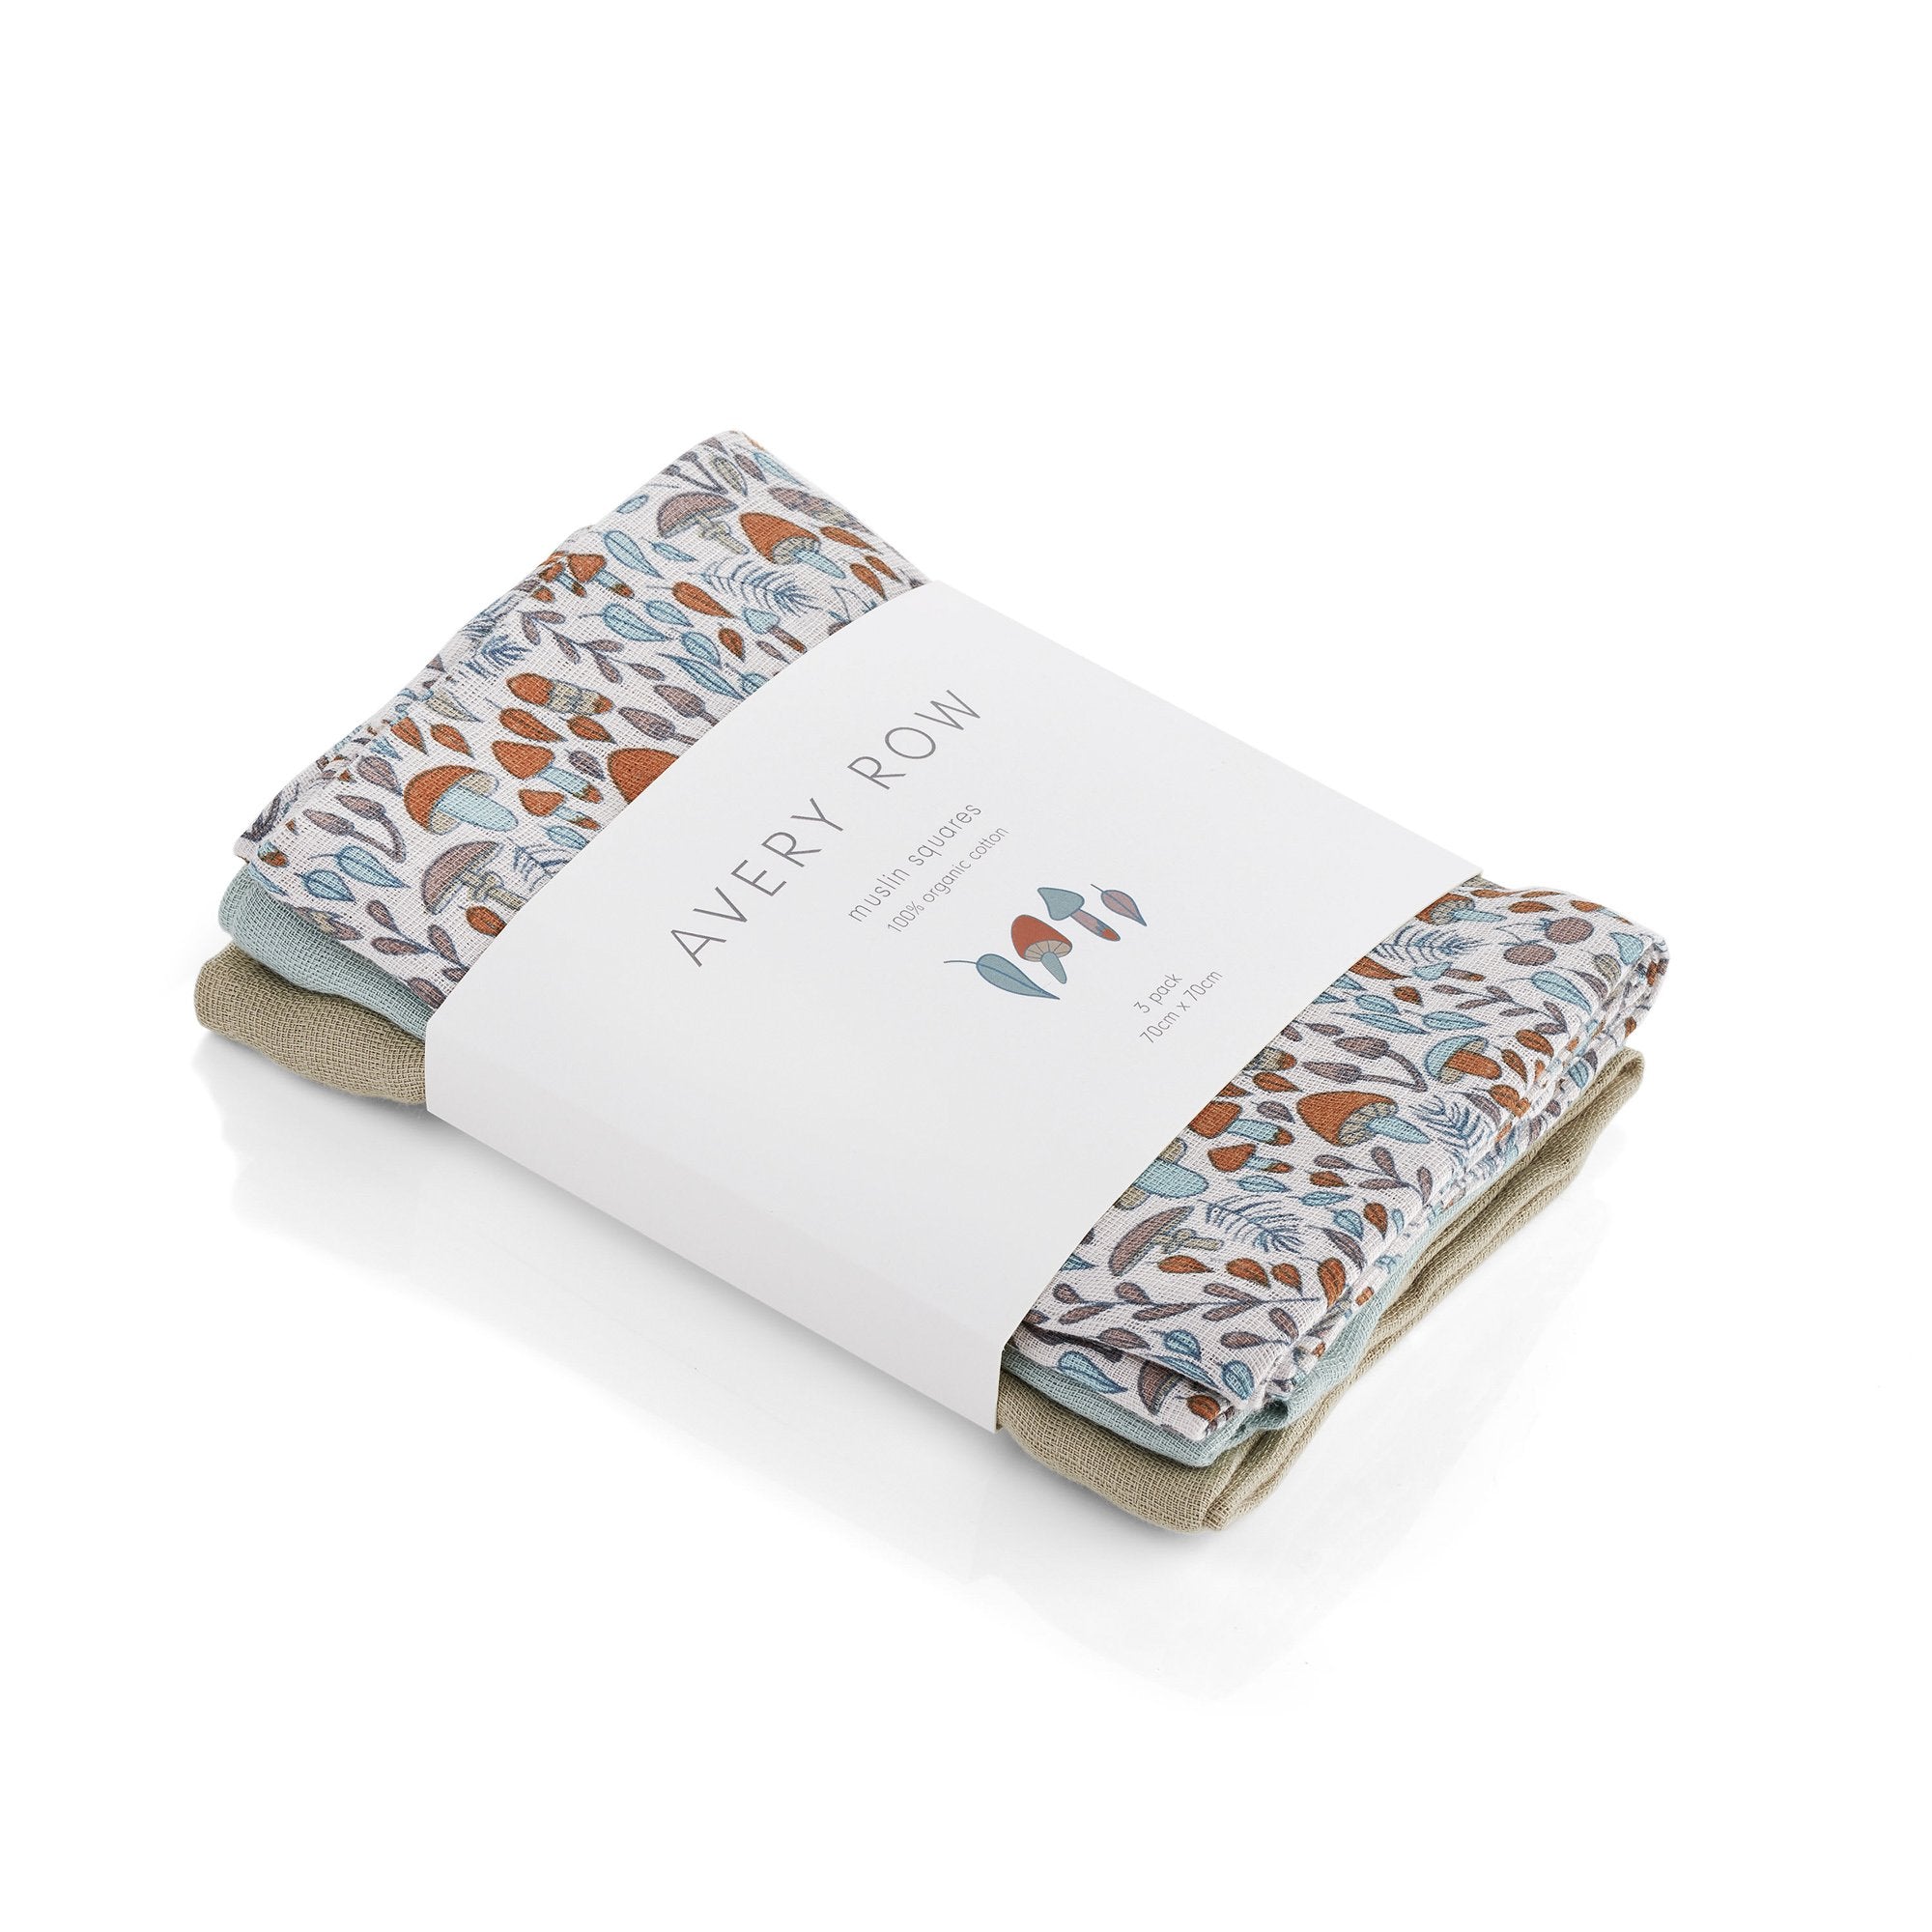 These Organic Muslin Squares are perfect for the new parent. Soft and comfortable to use, they can be used as bibs, blankets and even towels! The pack comes complete with a woodland pattern that will suit any nursery. 